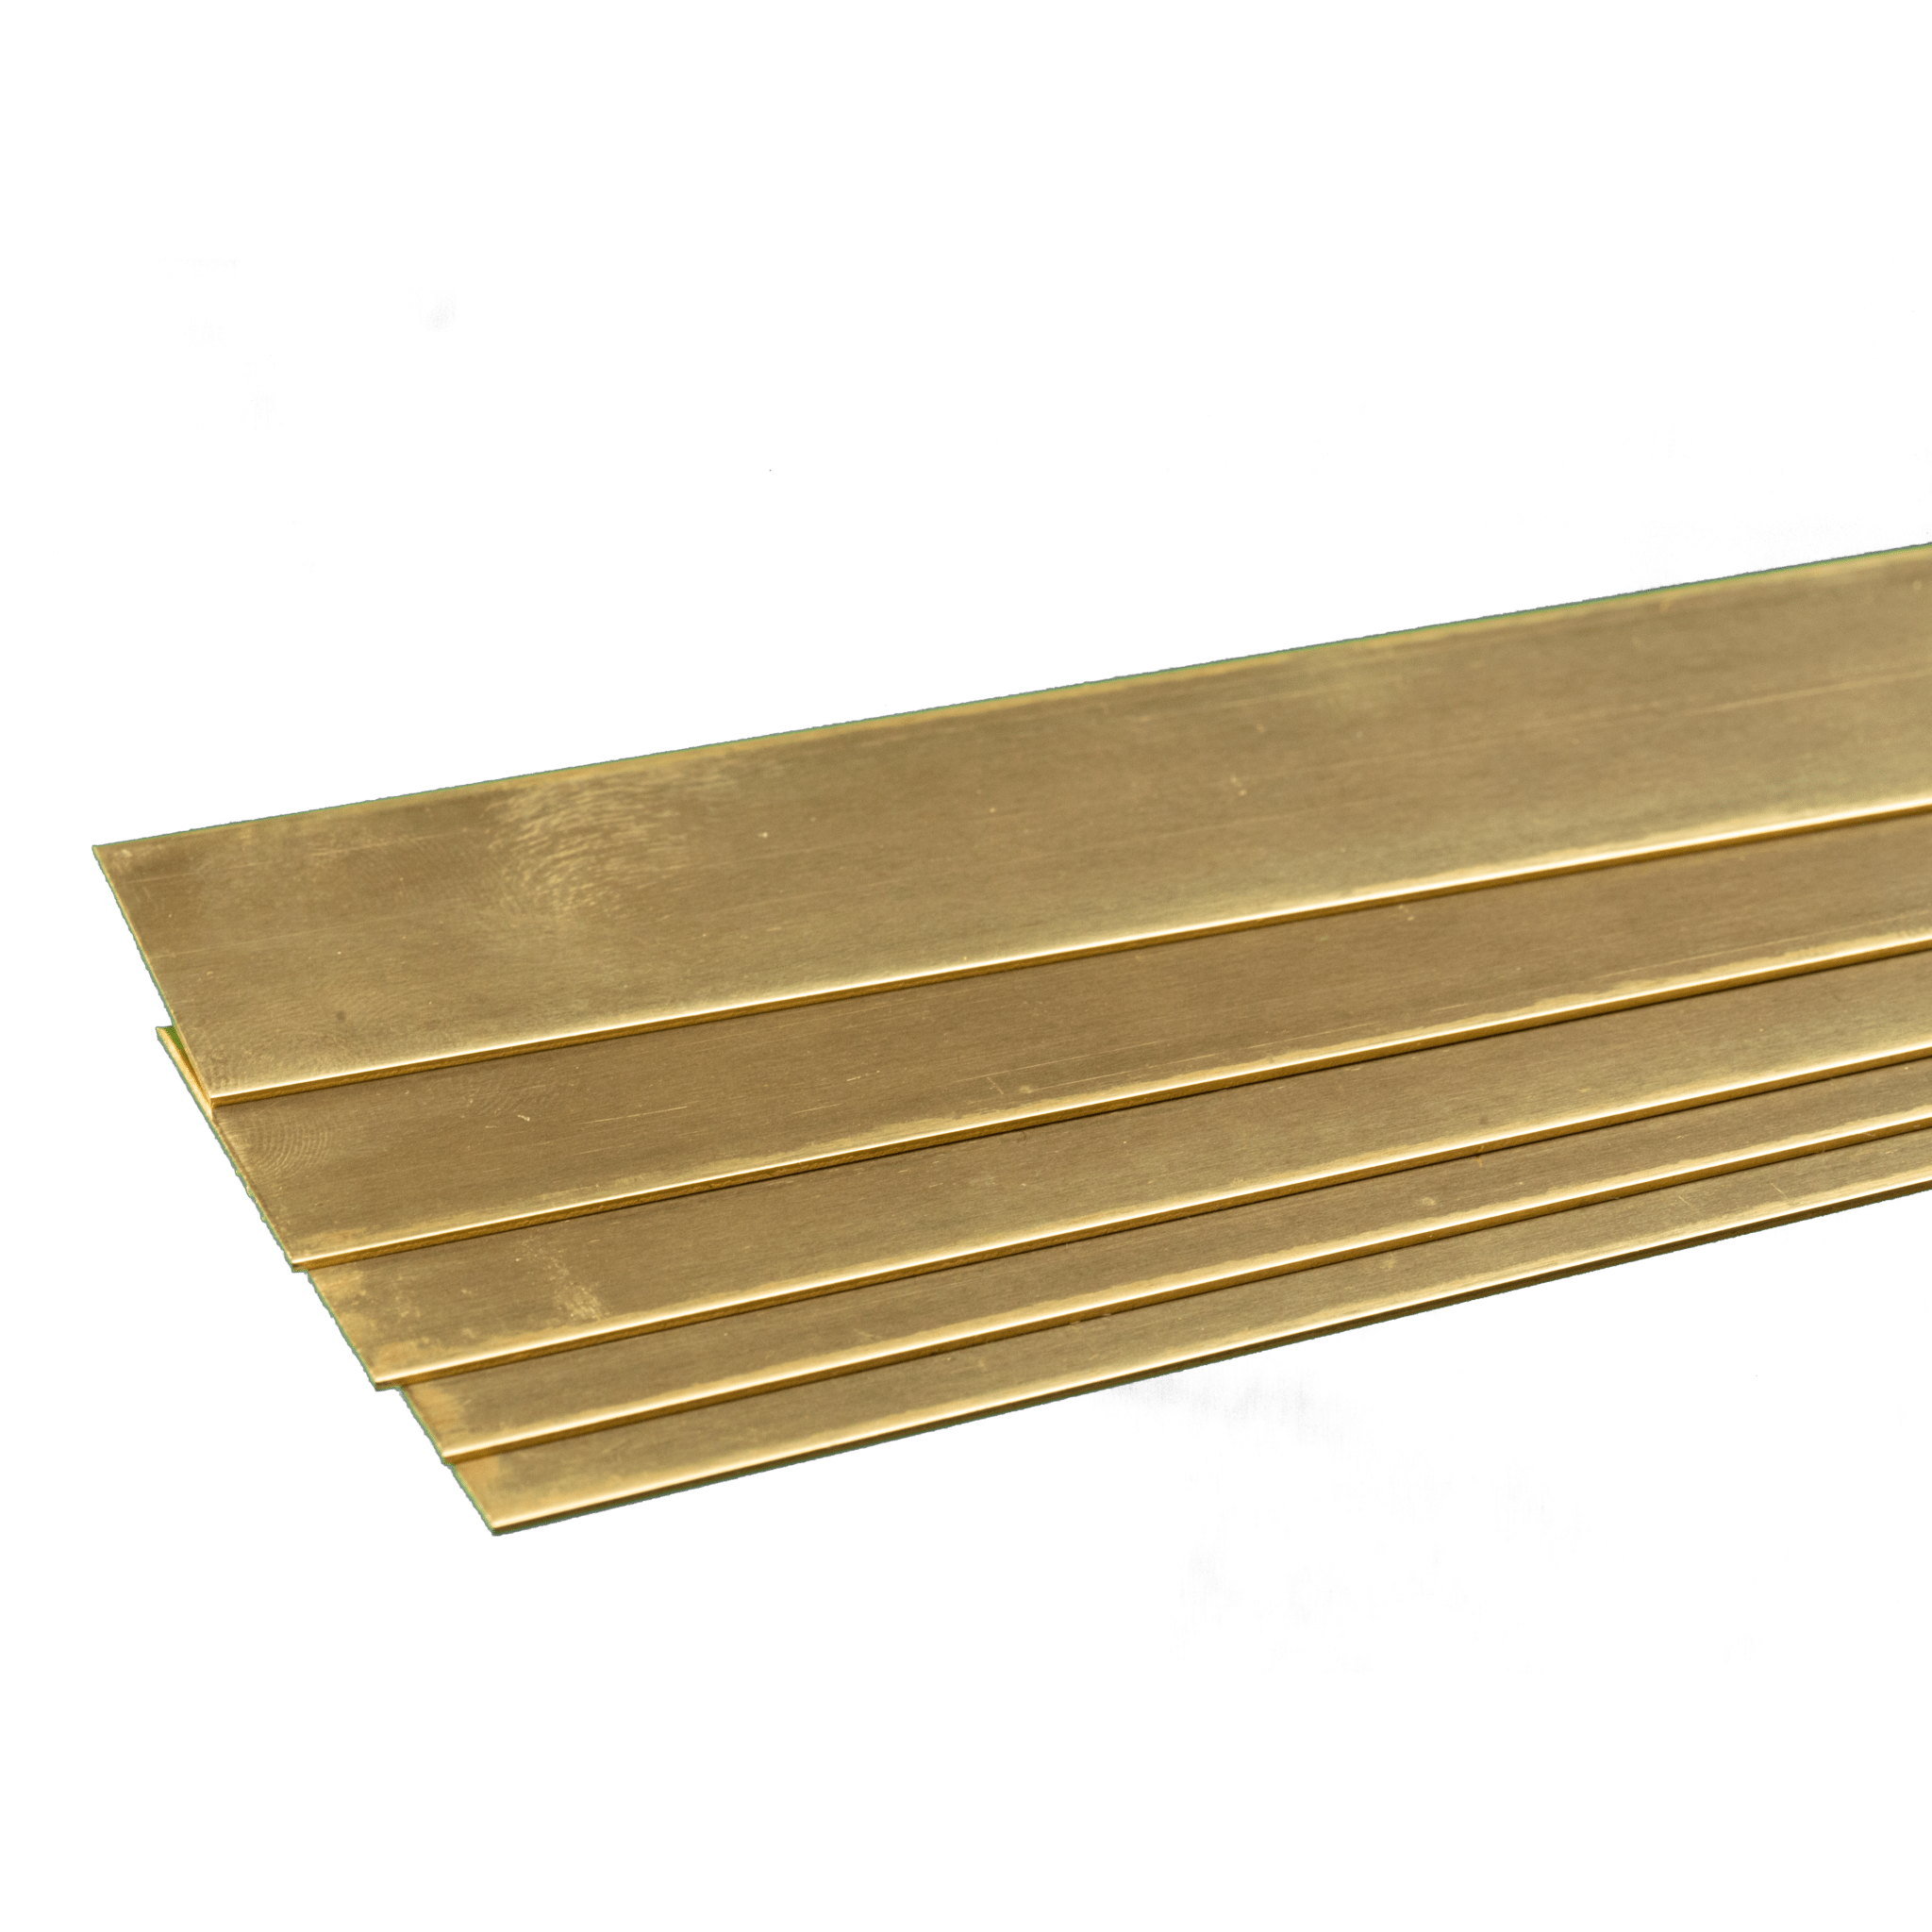  K&S 8235 Brass Strip, 0.025 Thick x 1/4 Wide x 12 Long, 1  Piece, Made in The USA : Industrial & Scientific